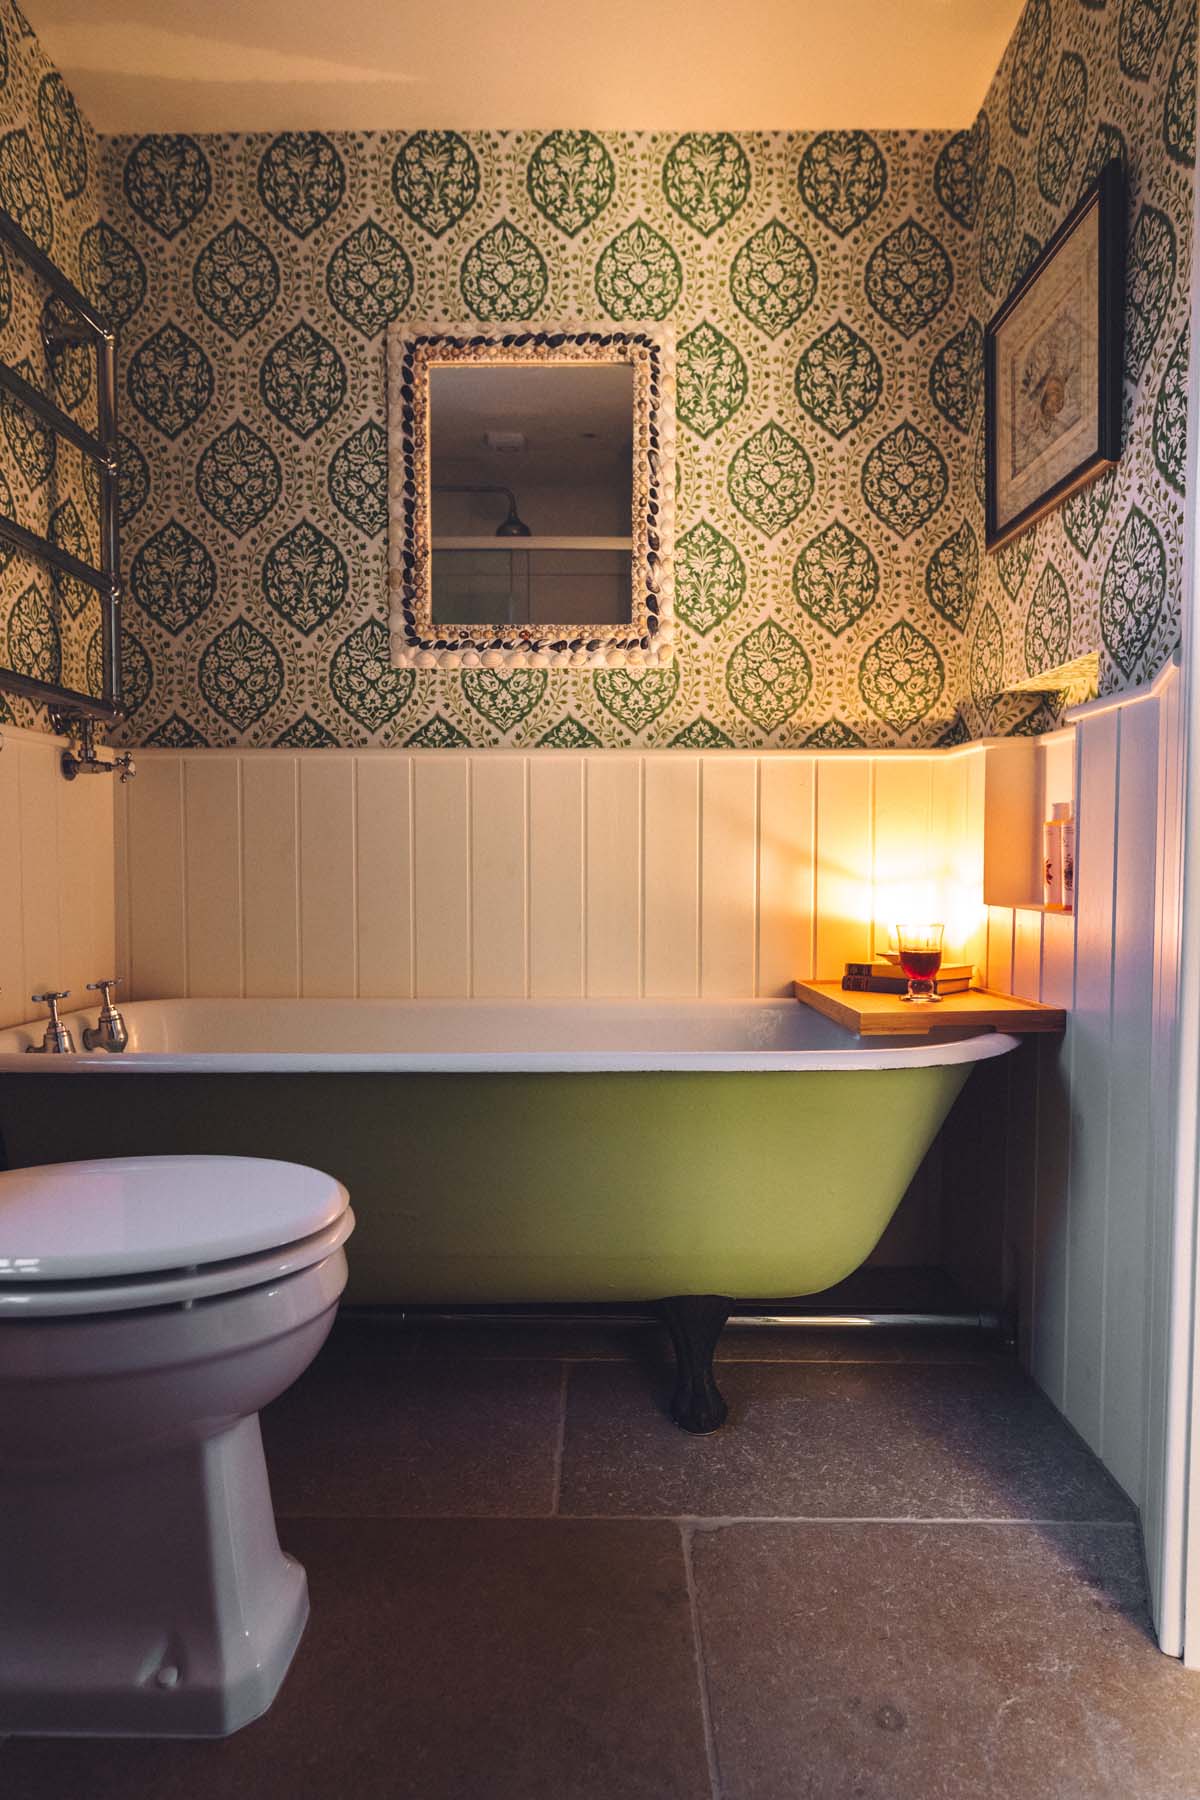 Cosy candlelit cottage bathroom with a green roll top tub